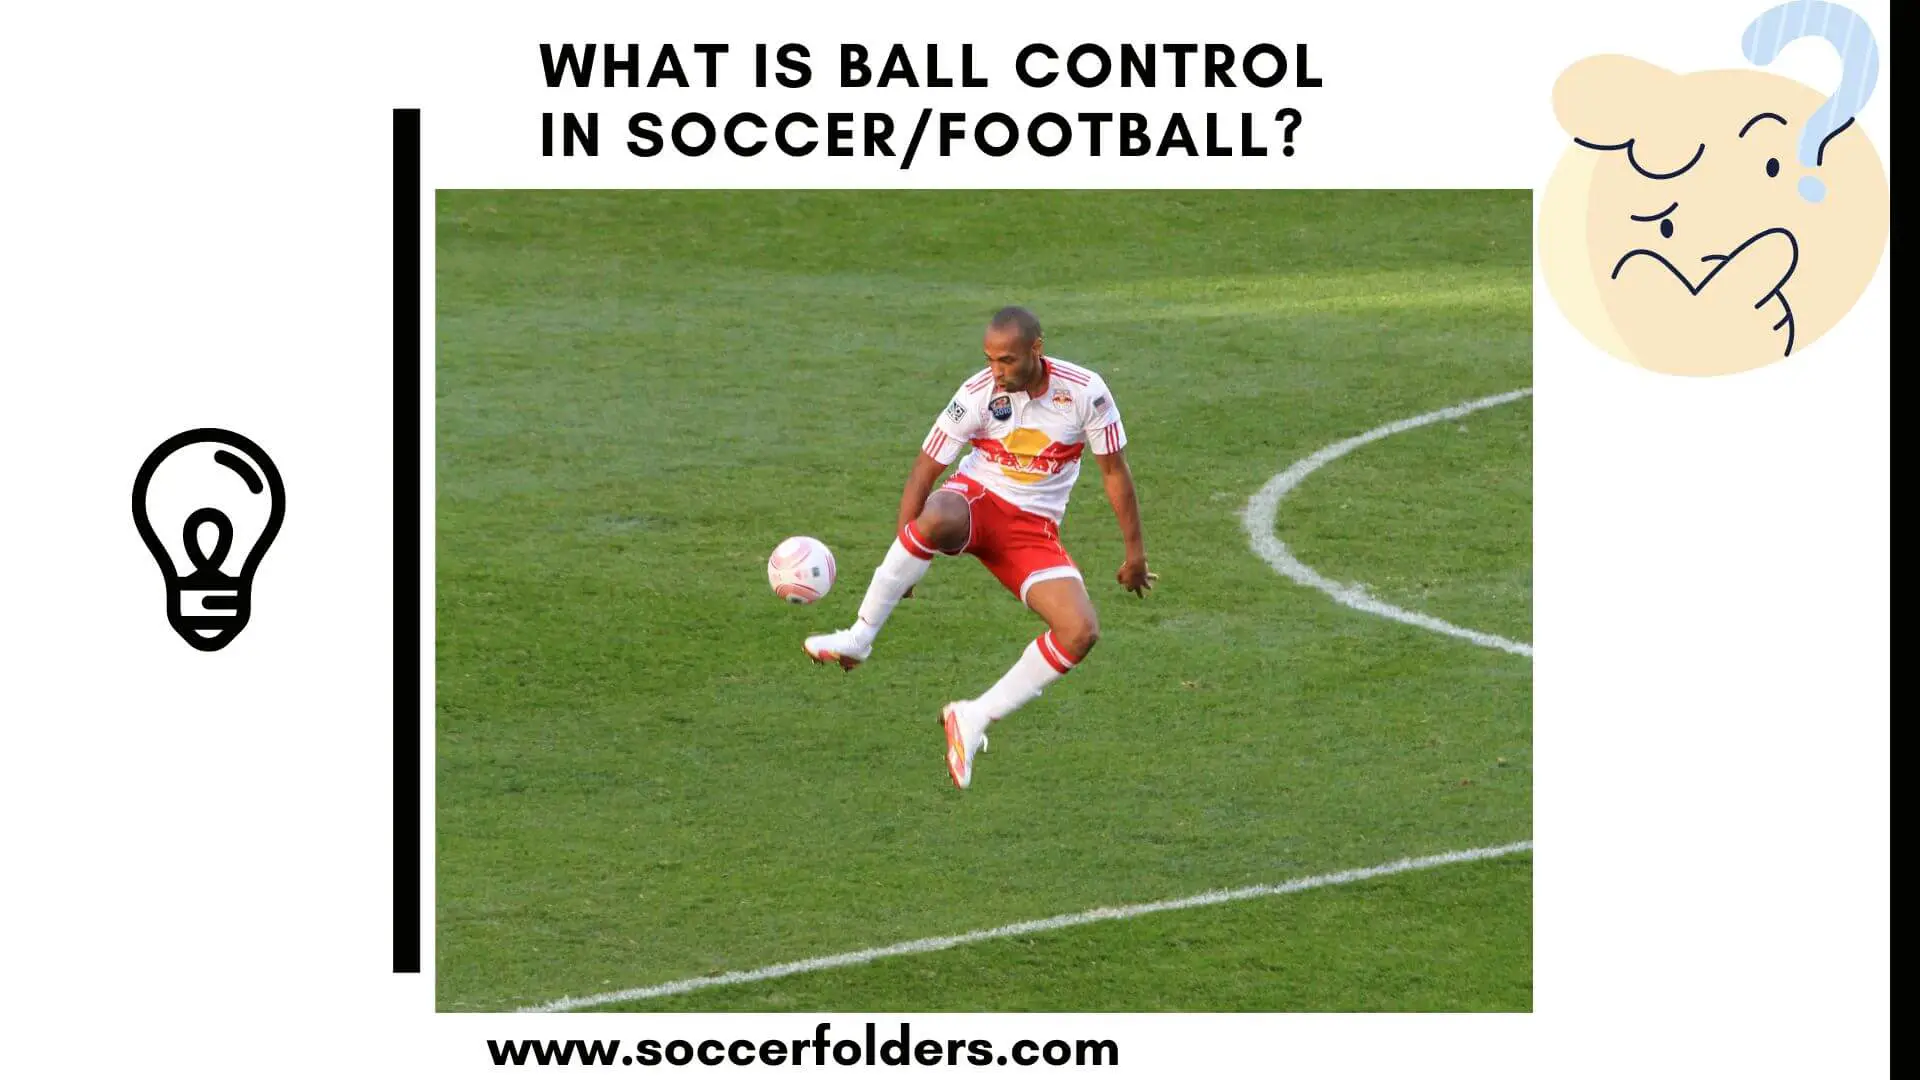 What is ball control in soccer/football - Featured image